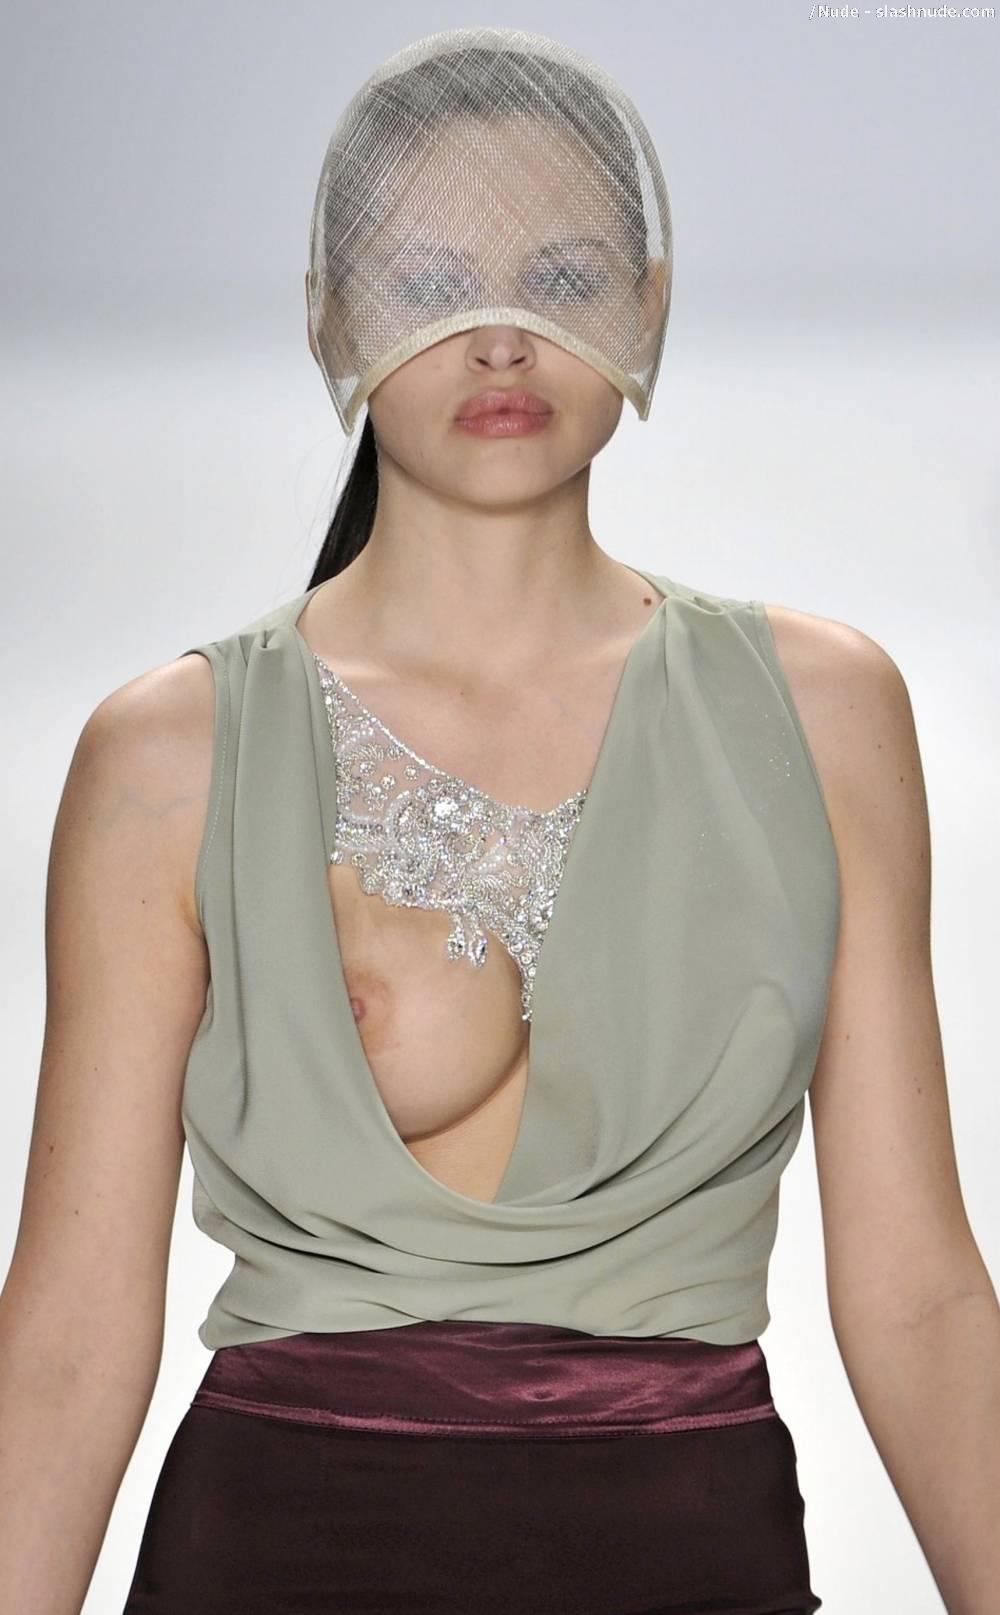 Hana Nitsche Breast Slips Out Of Her Top On Runway 3